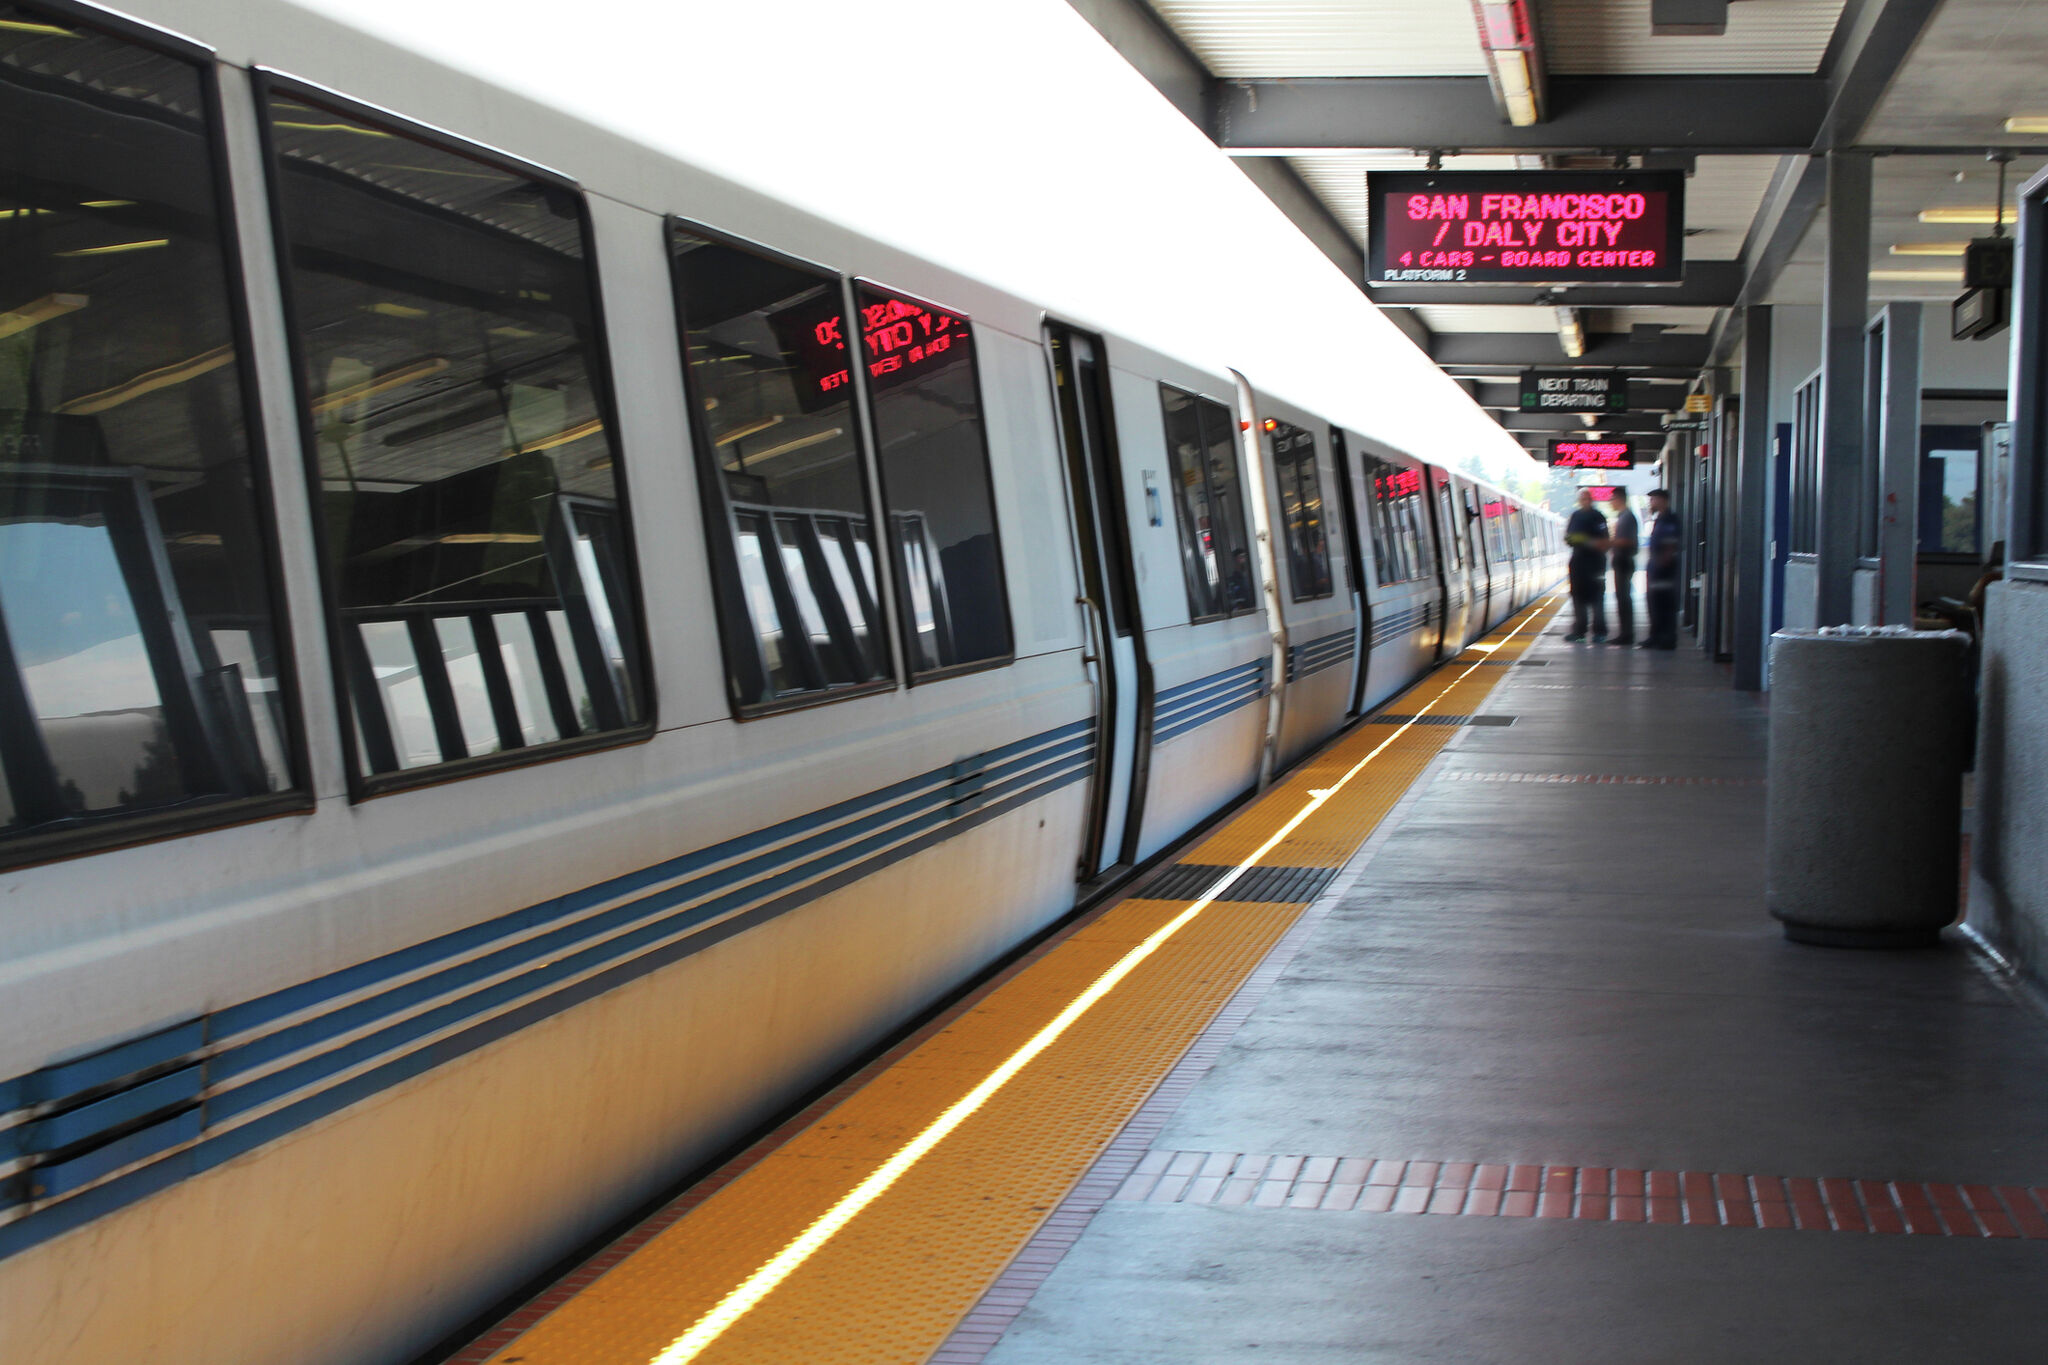 A complete guide to San Francisco public transportation